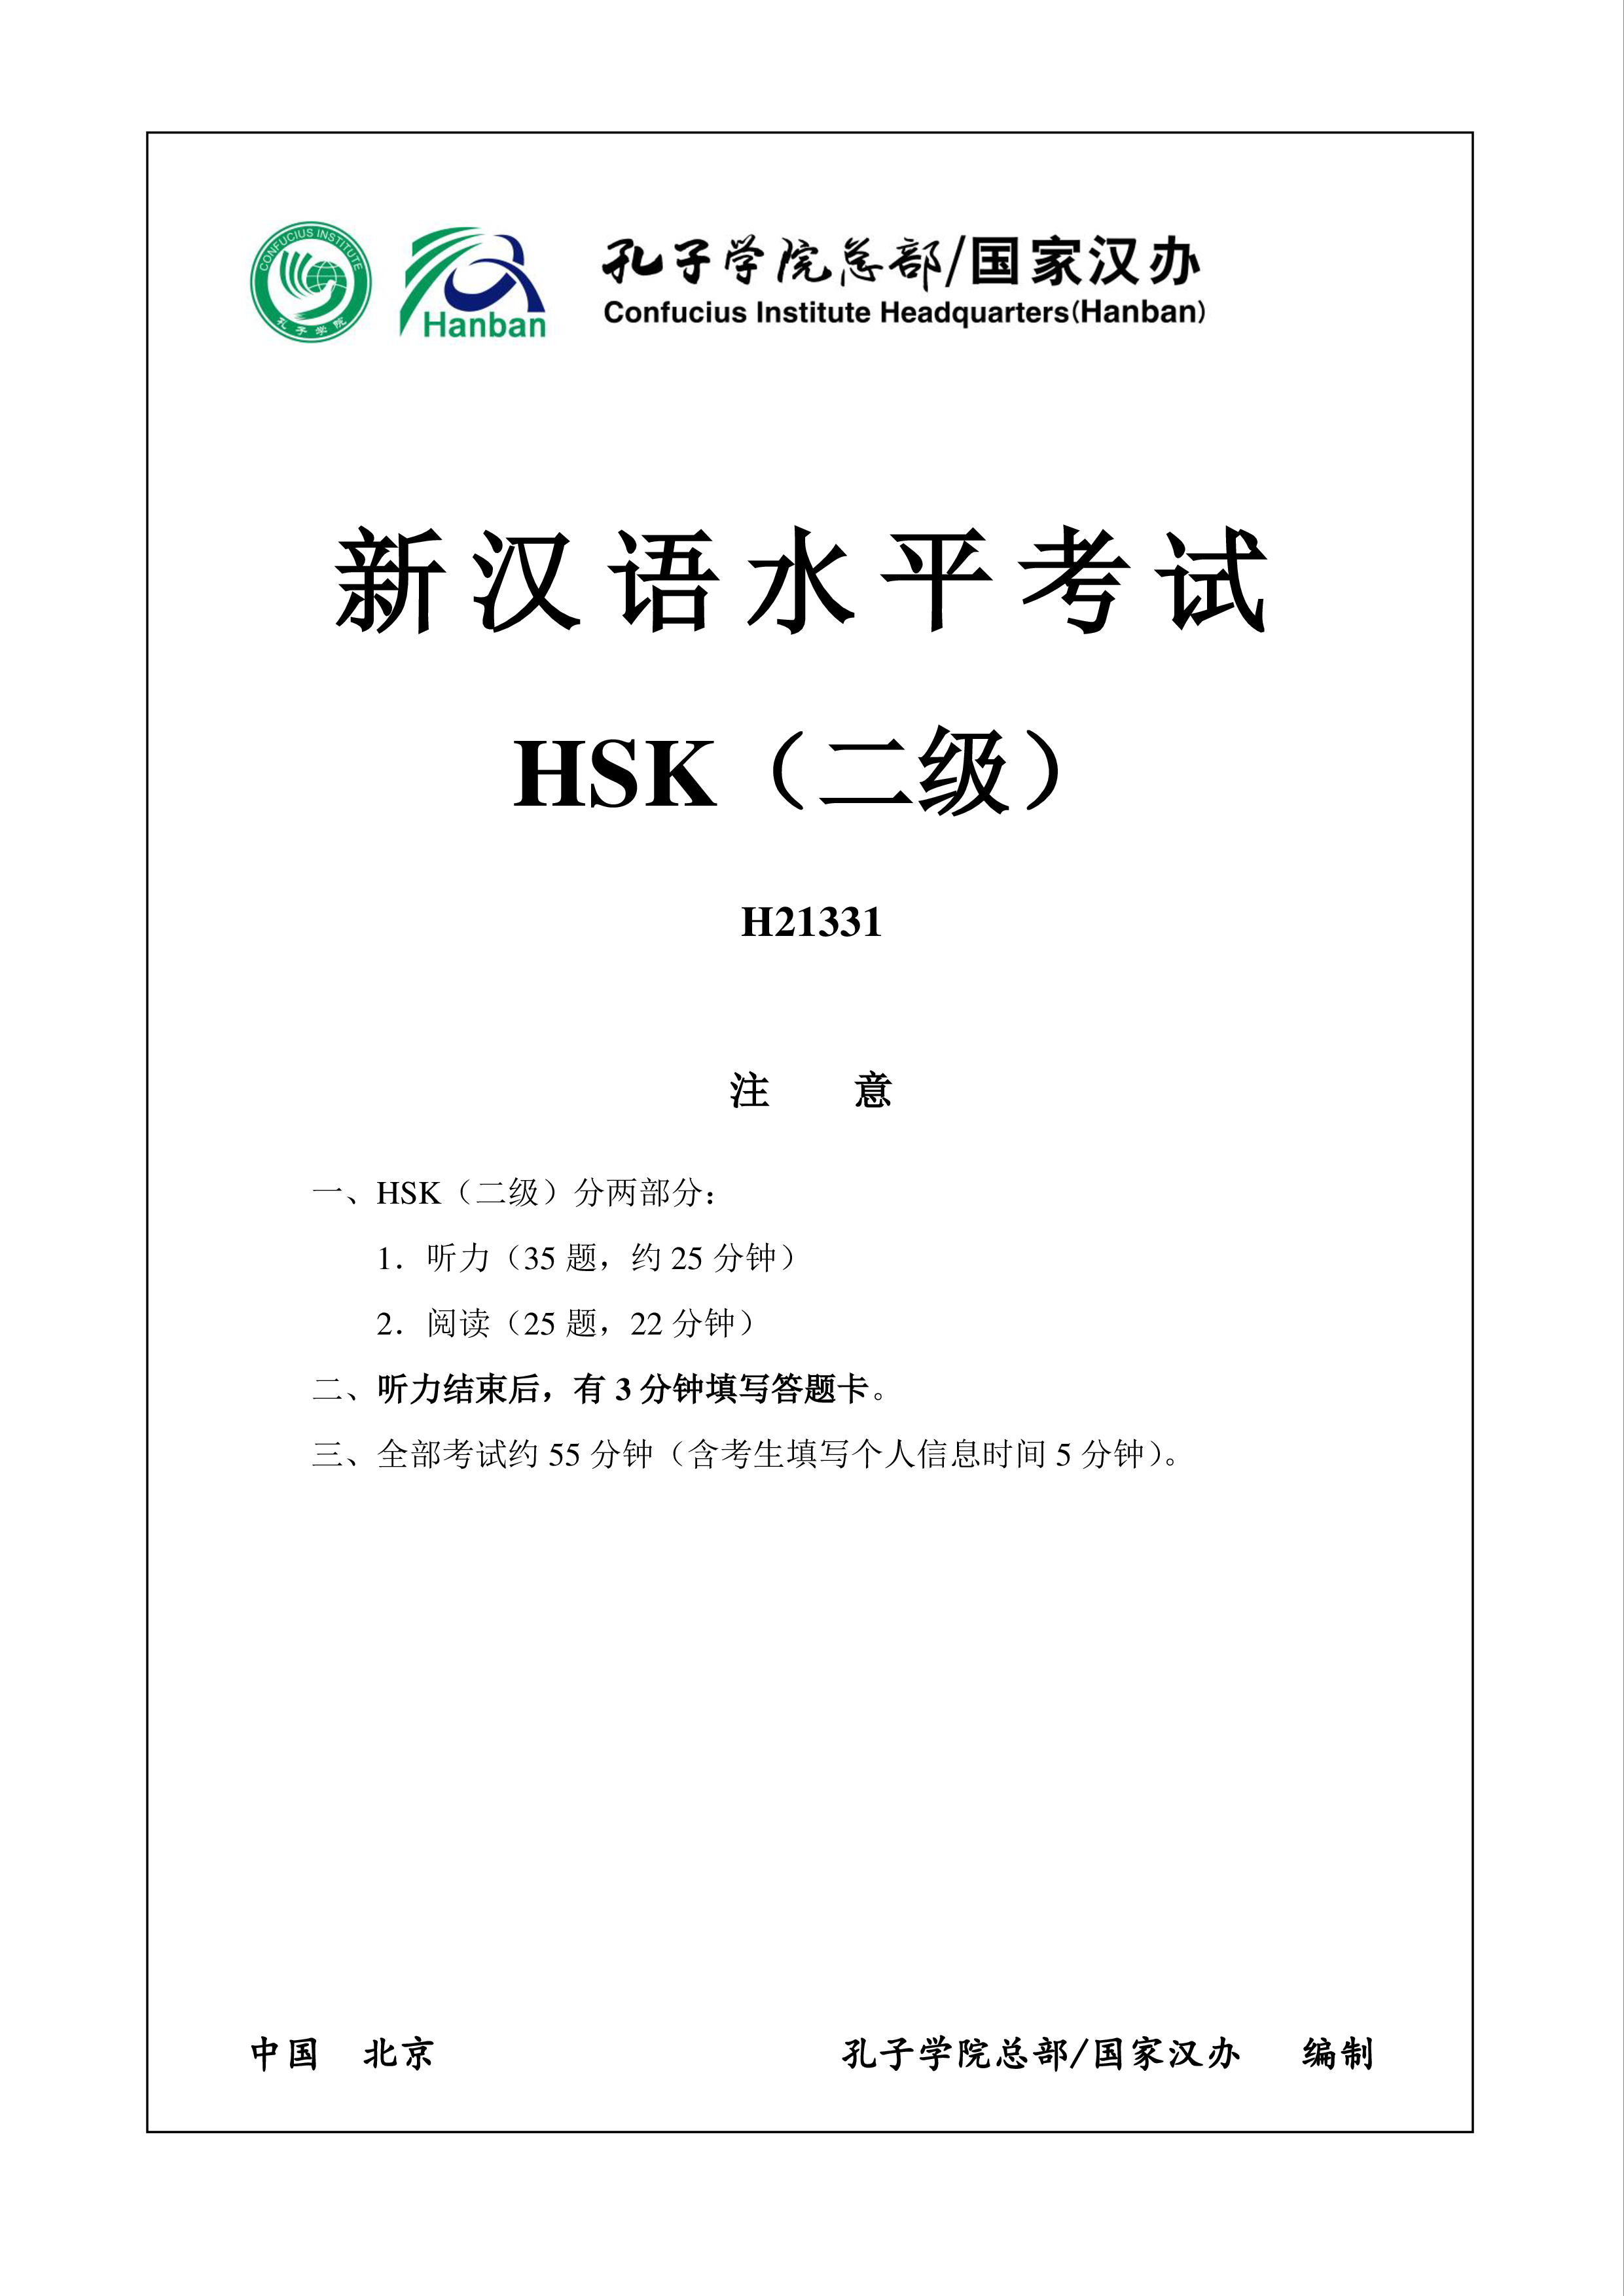 HSK2 Chinese Exam including Answers # HSK2 H21331 模板